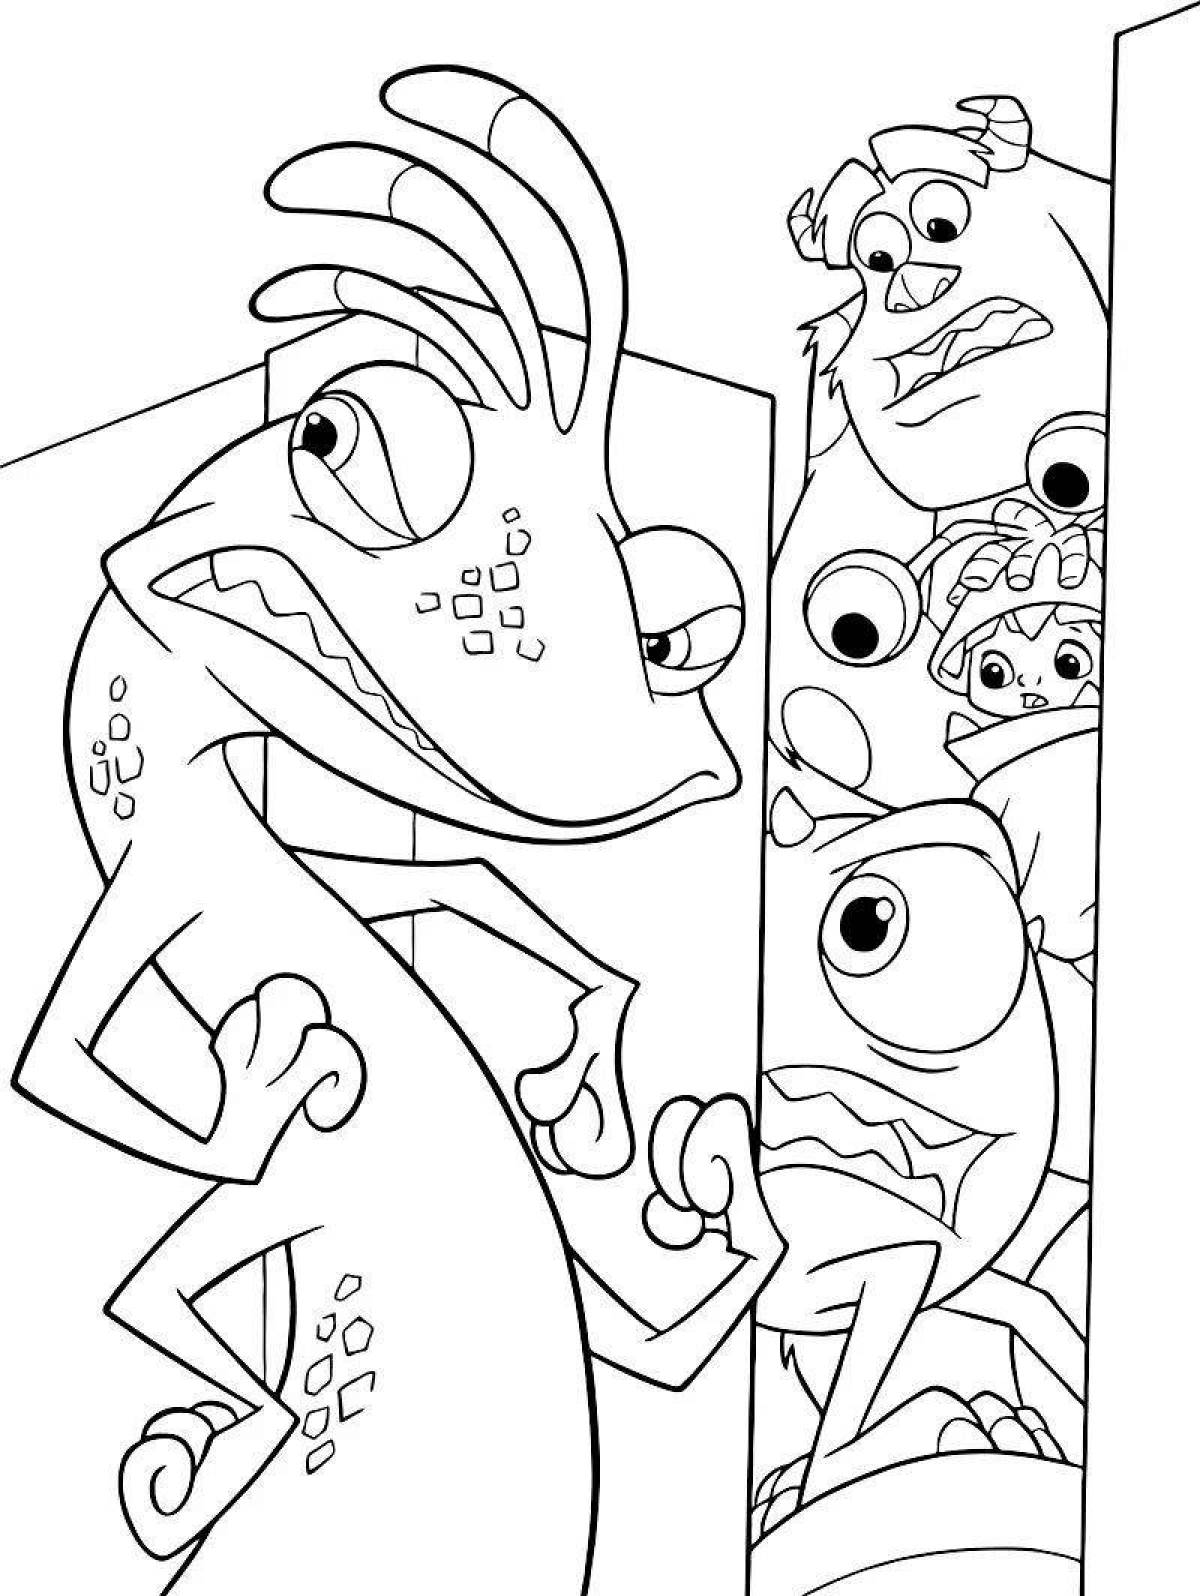 Amazing sally and boo coloring page